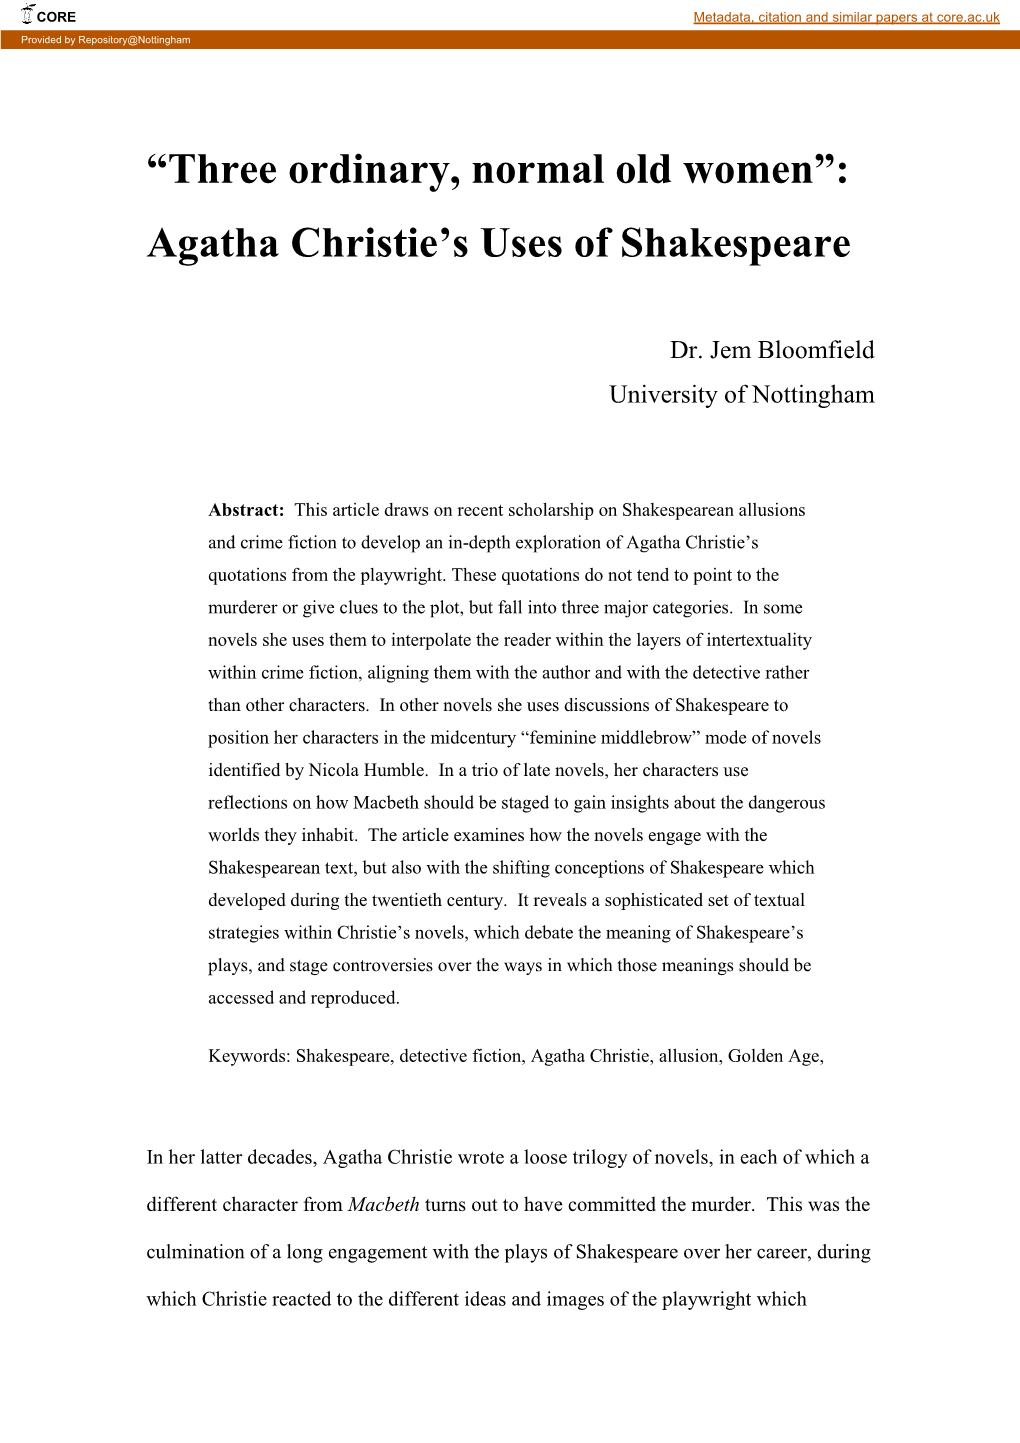 Agatha Christie's Uses of Shakespeare